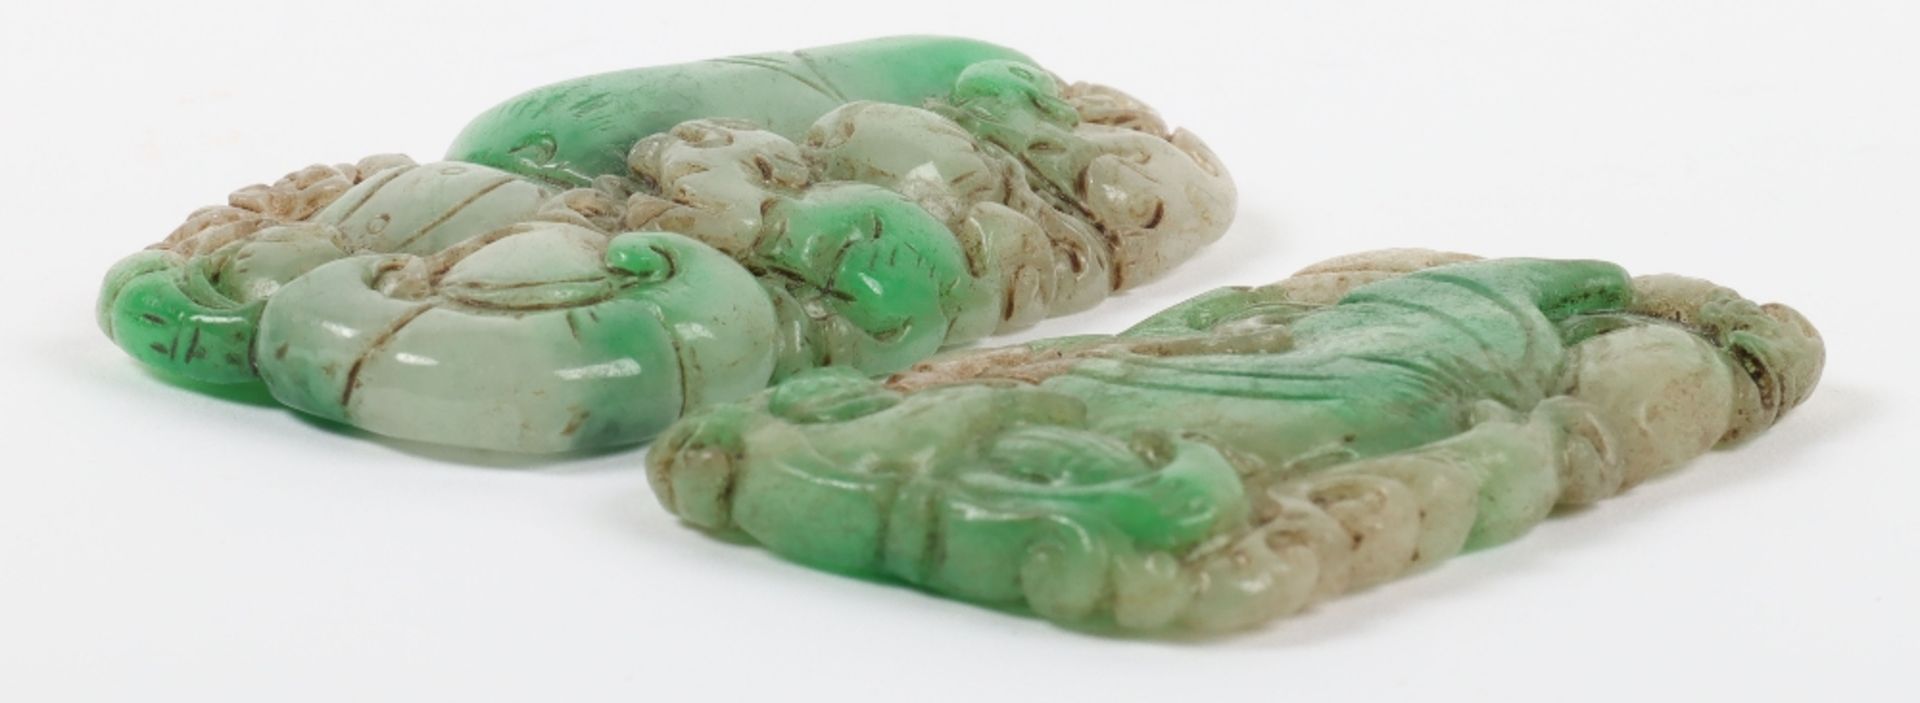 A Chinese jade plaque / toggle - Image 3 of 3